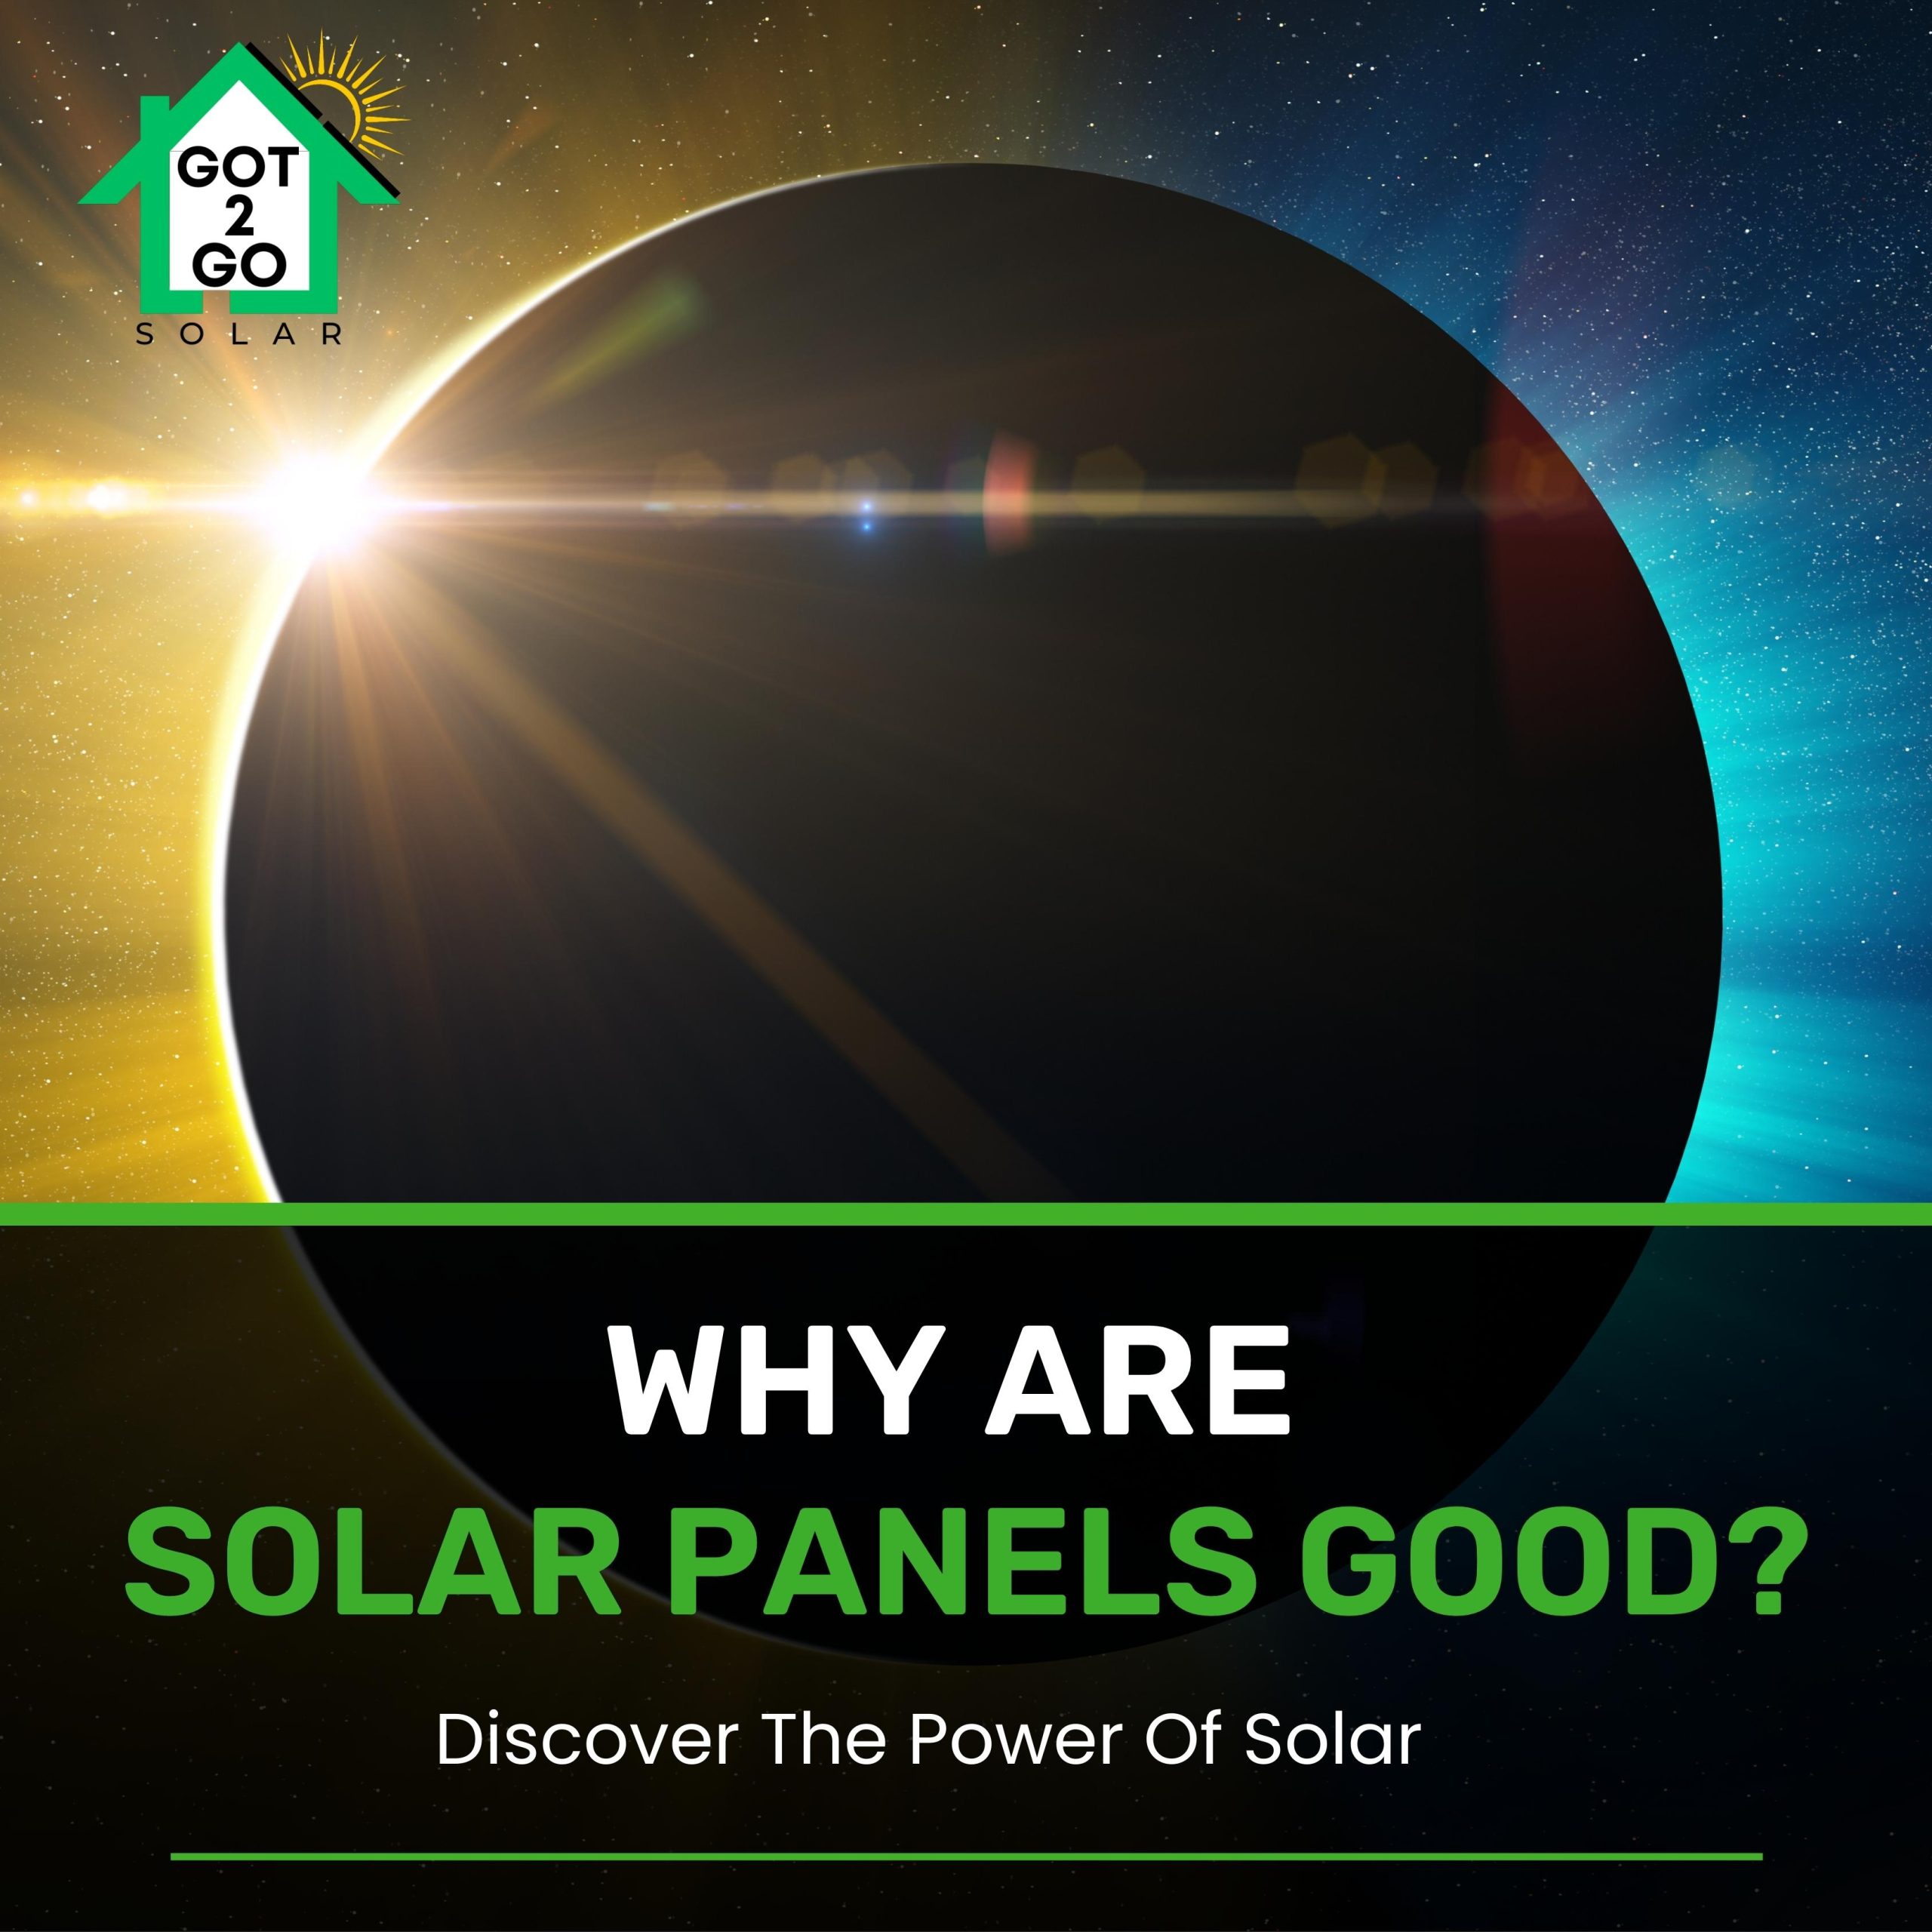 Why are solar panels good?